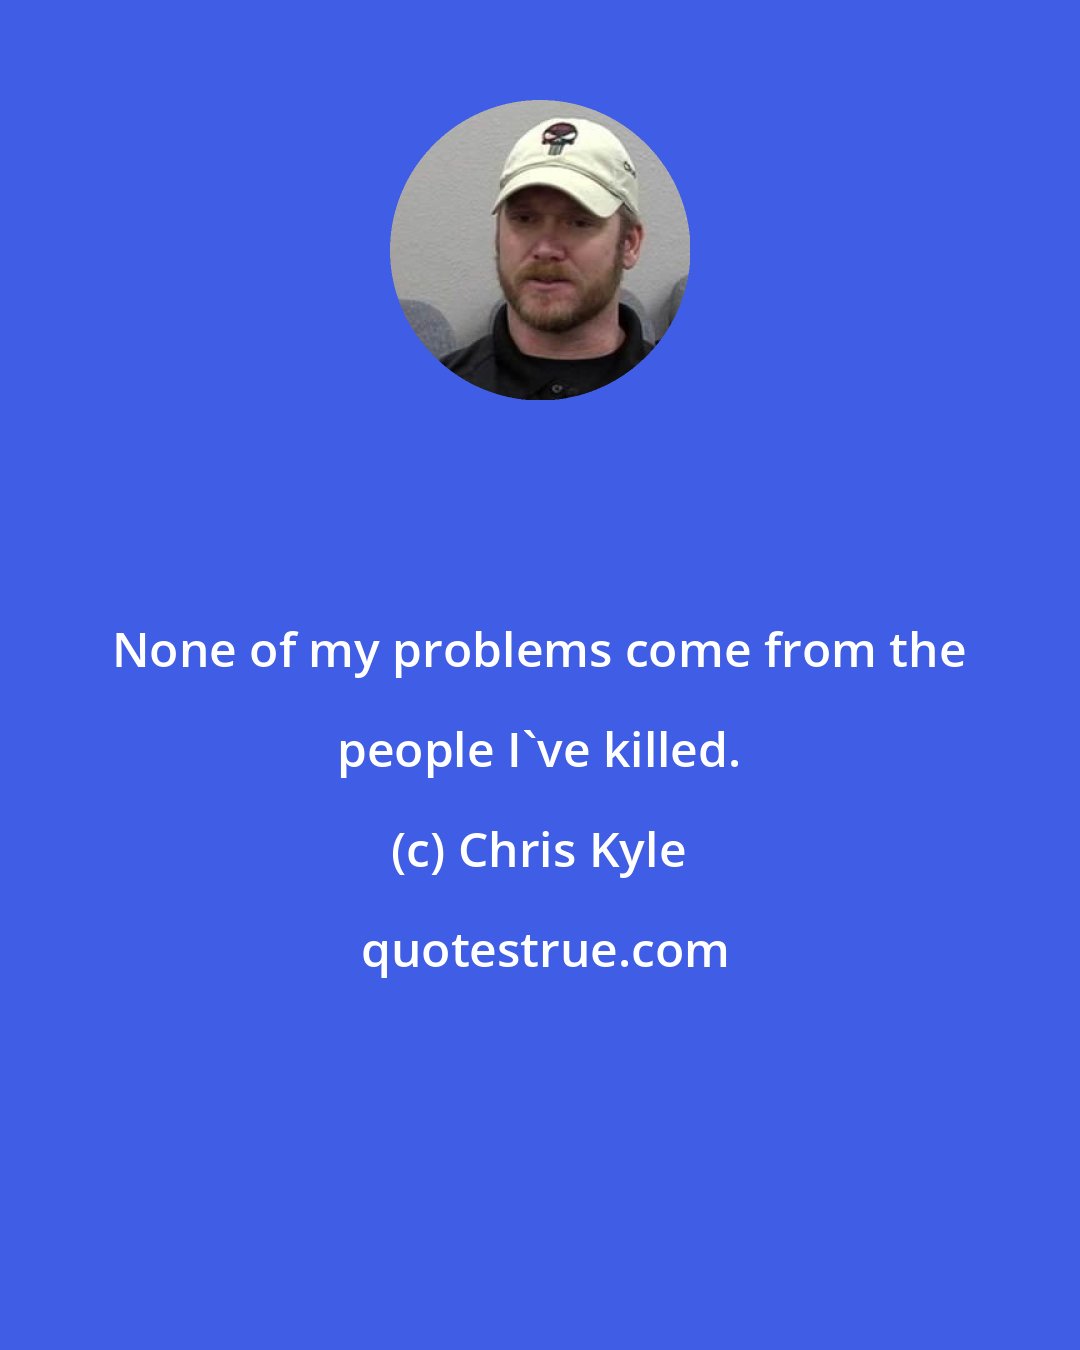 Chris Kyle: None of my problems come from the people I've killed.